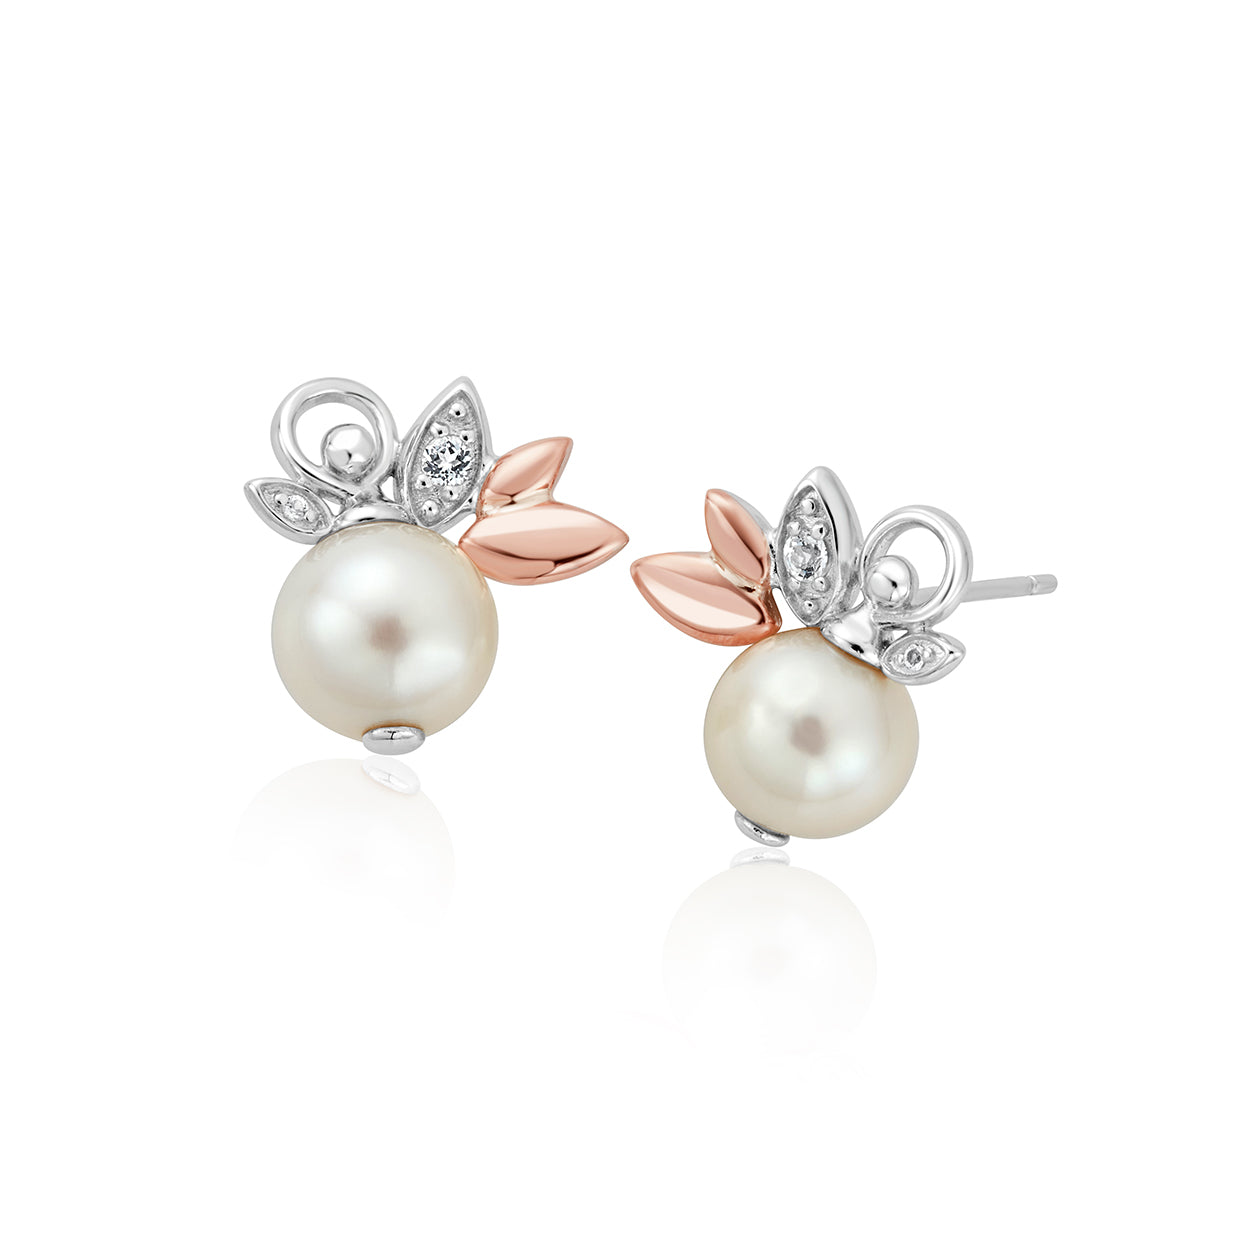 Clogau Lily of the Valley Pearl Stud Earrings - 3SLYV0294